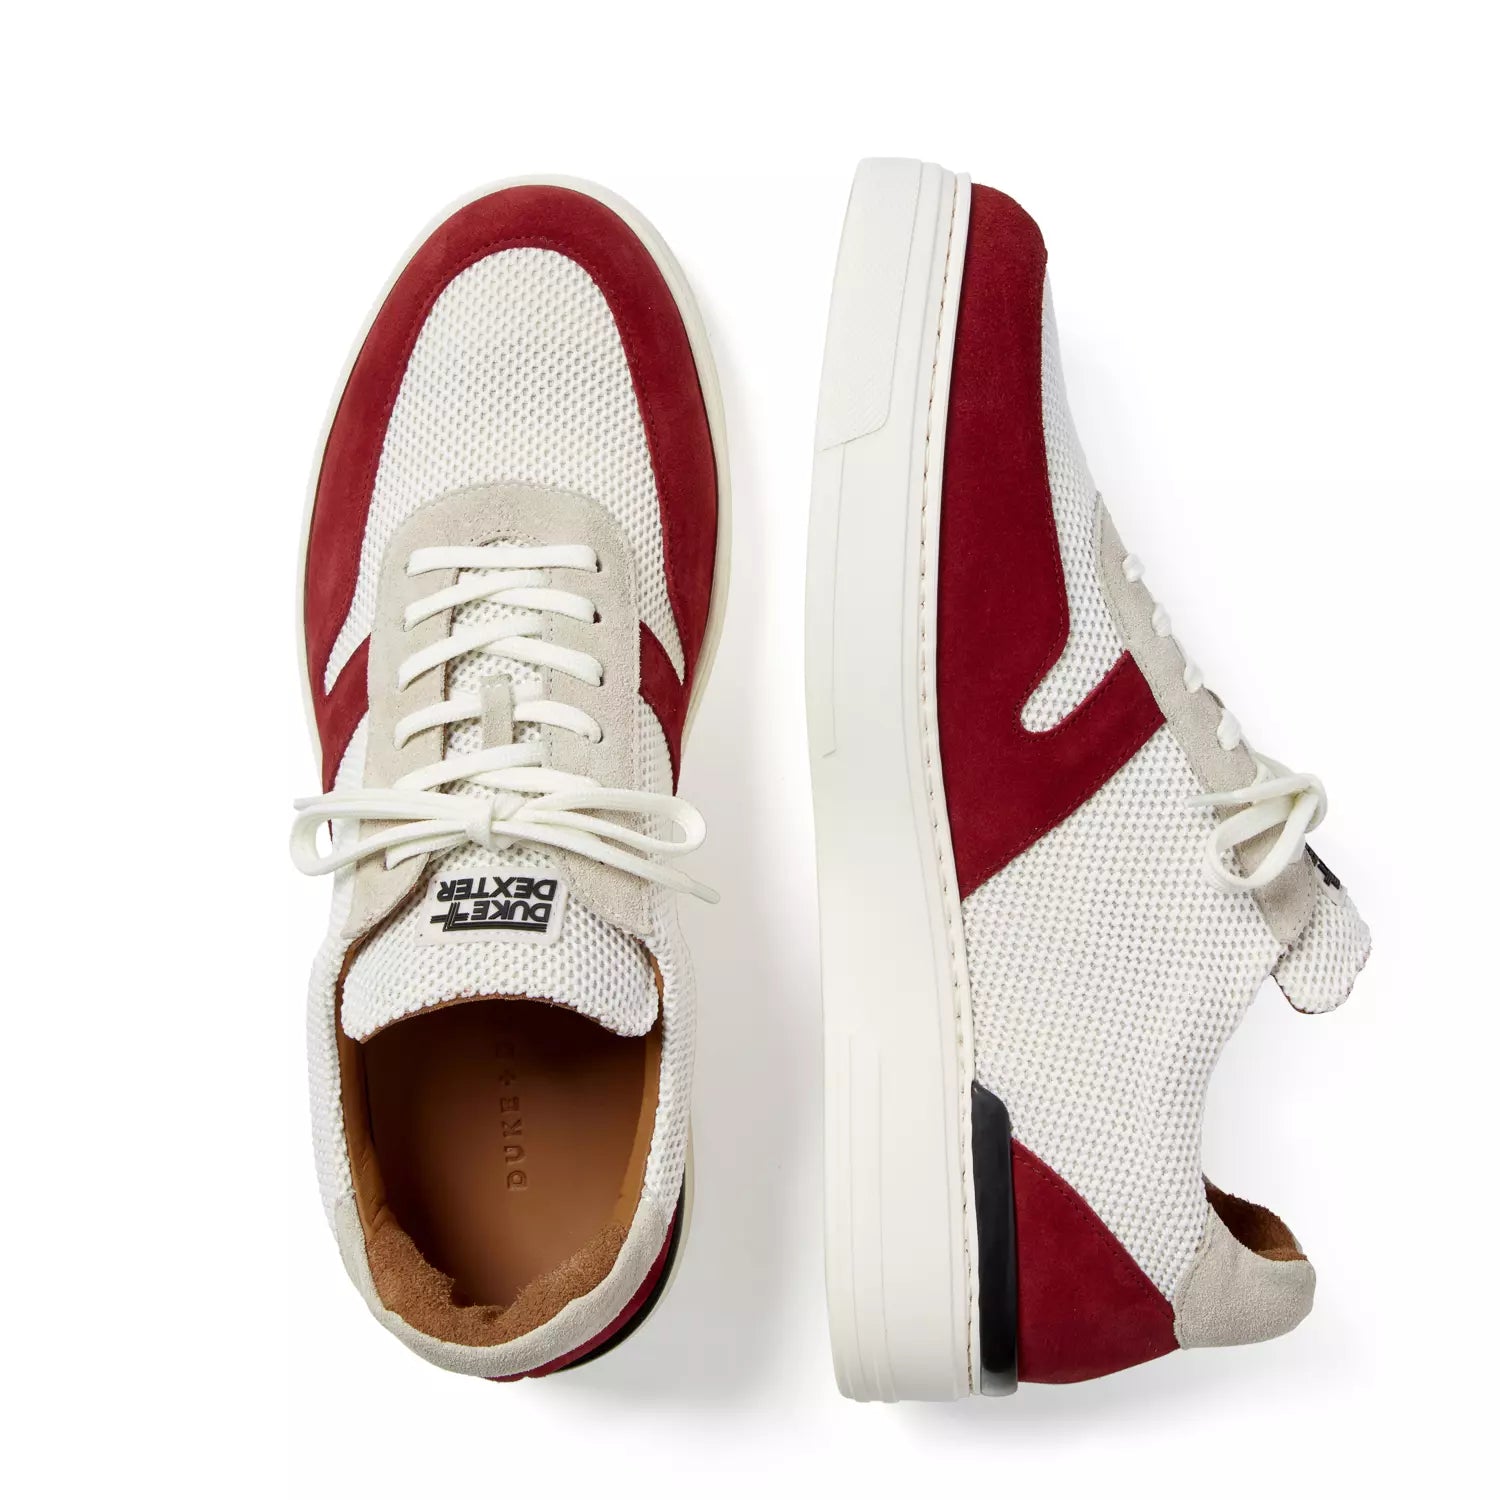 Duke and Dexter Ritchie Rio sneakers for men extra light comfortable White and Burgundy top view